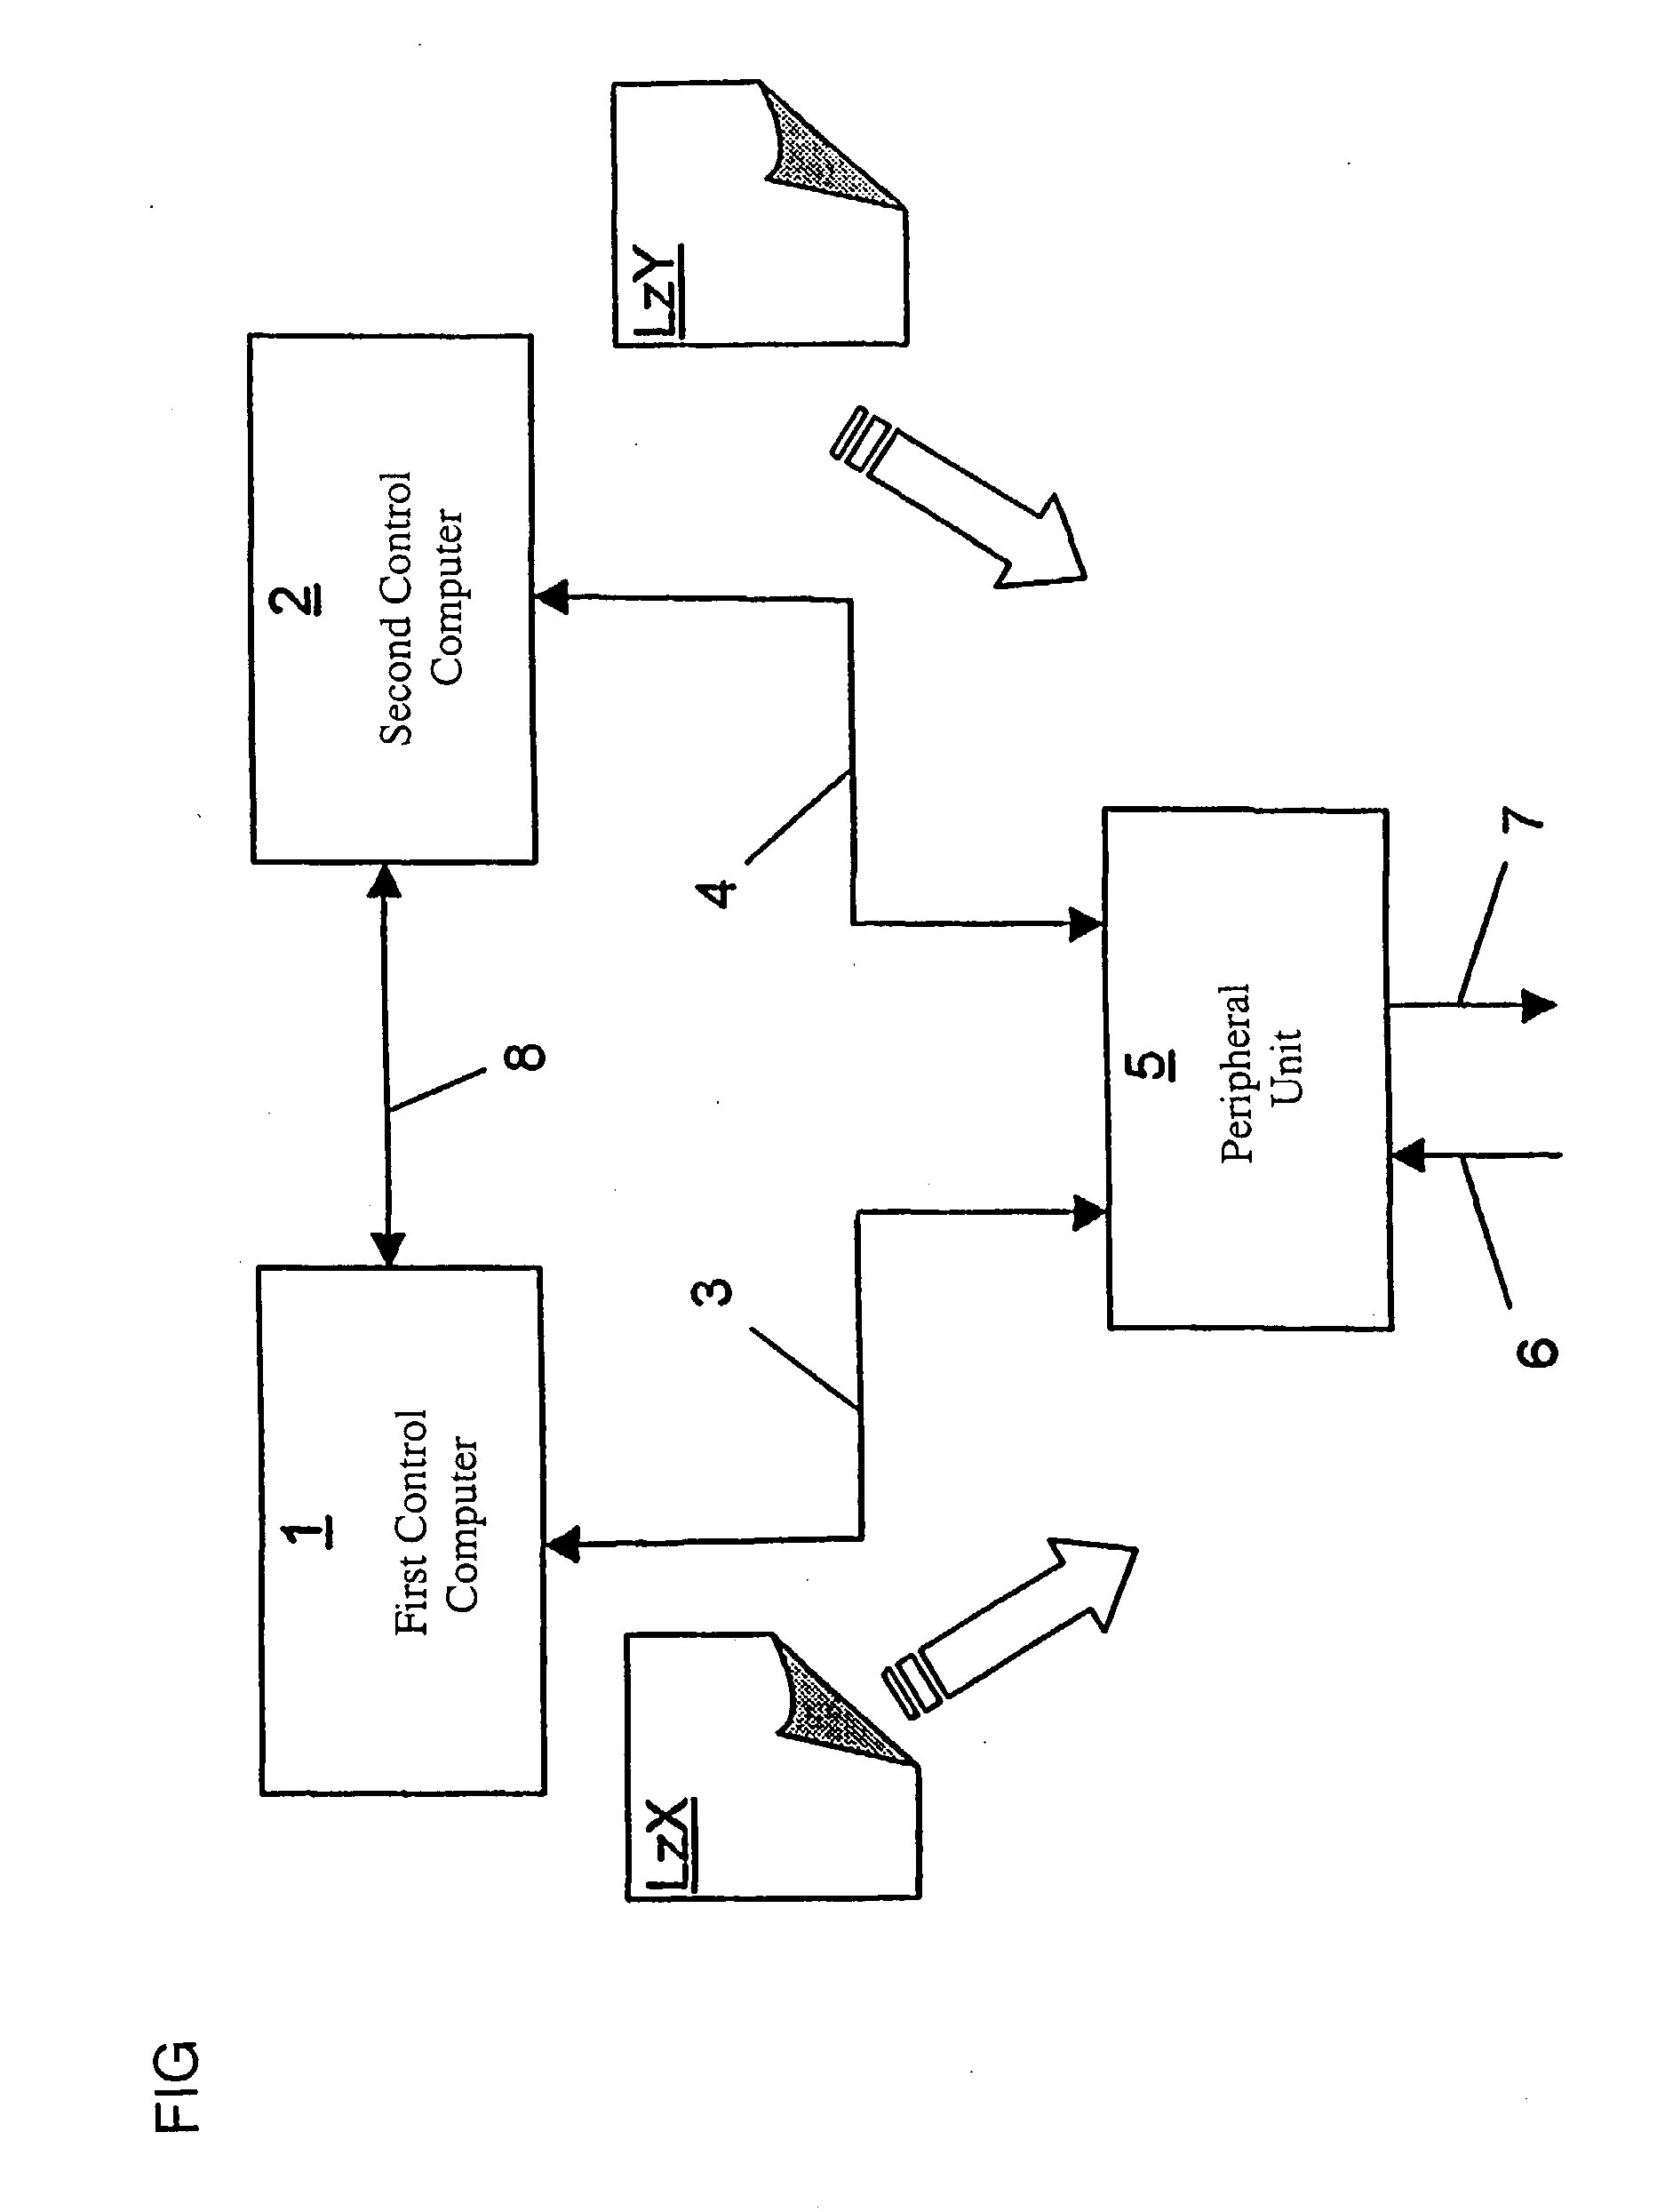 Redundant control system and control computer and peripheral unit for a control system of this type